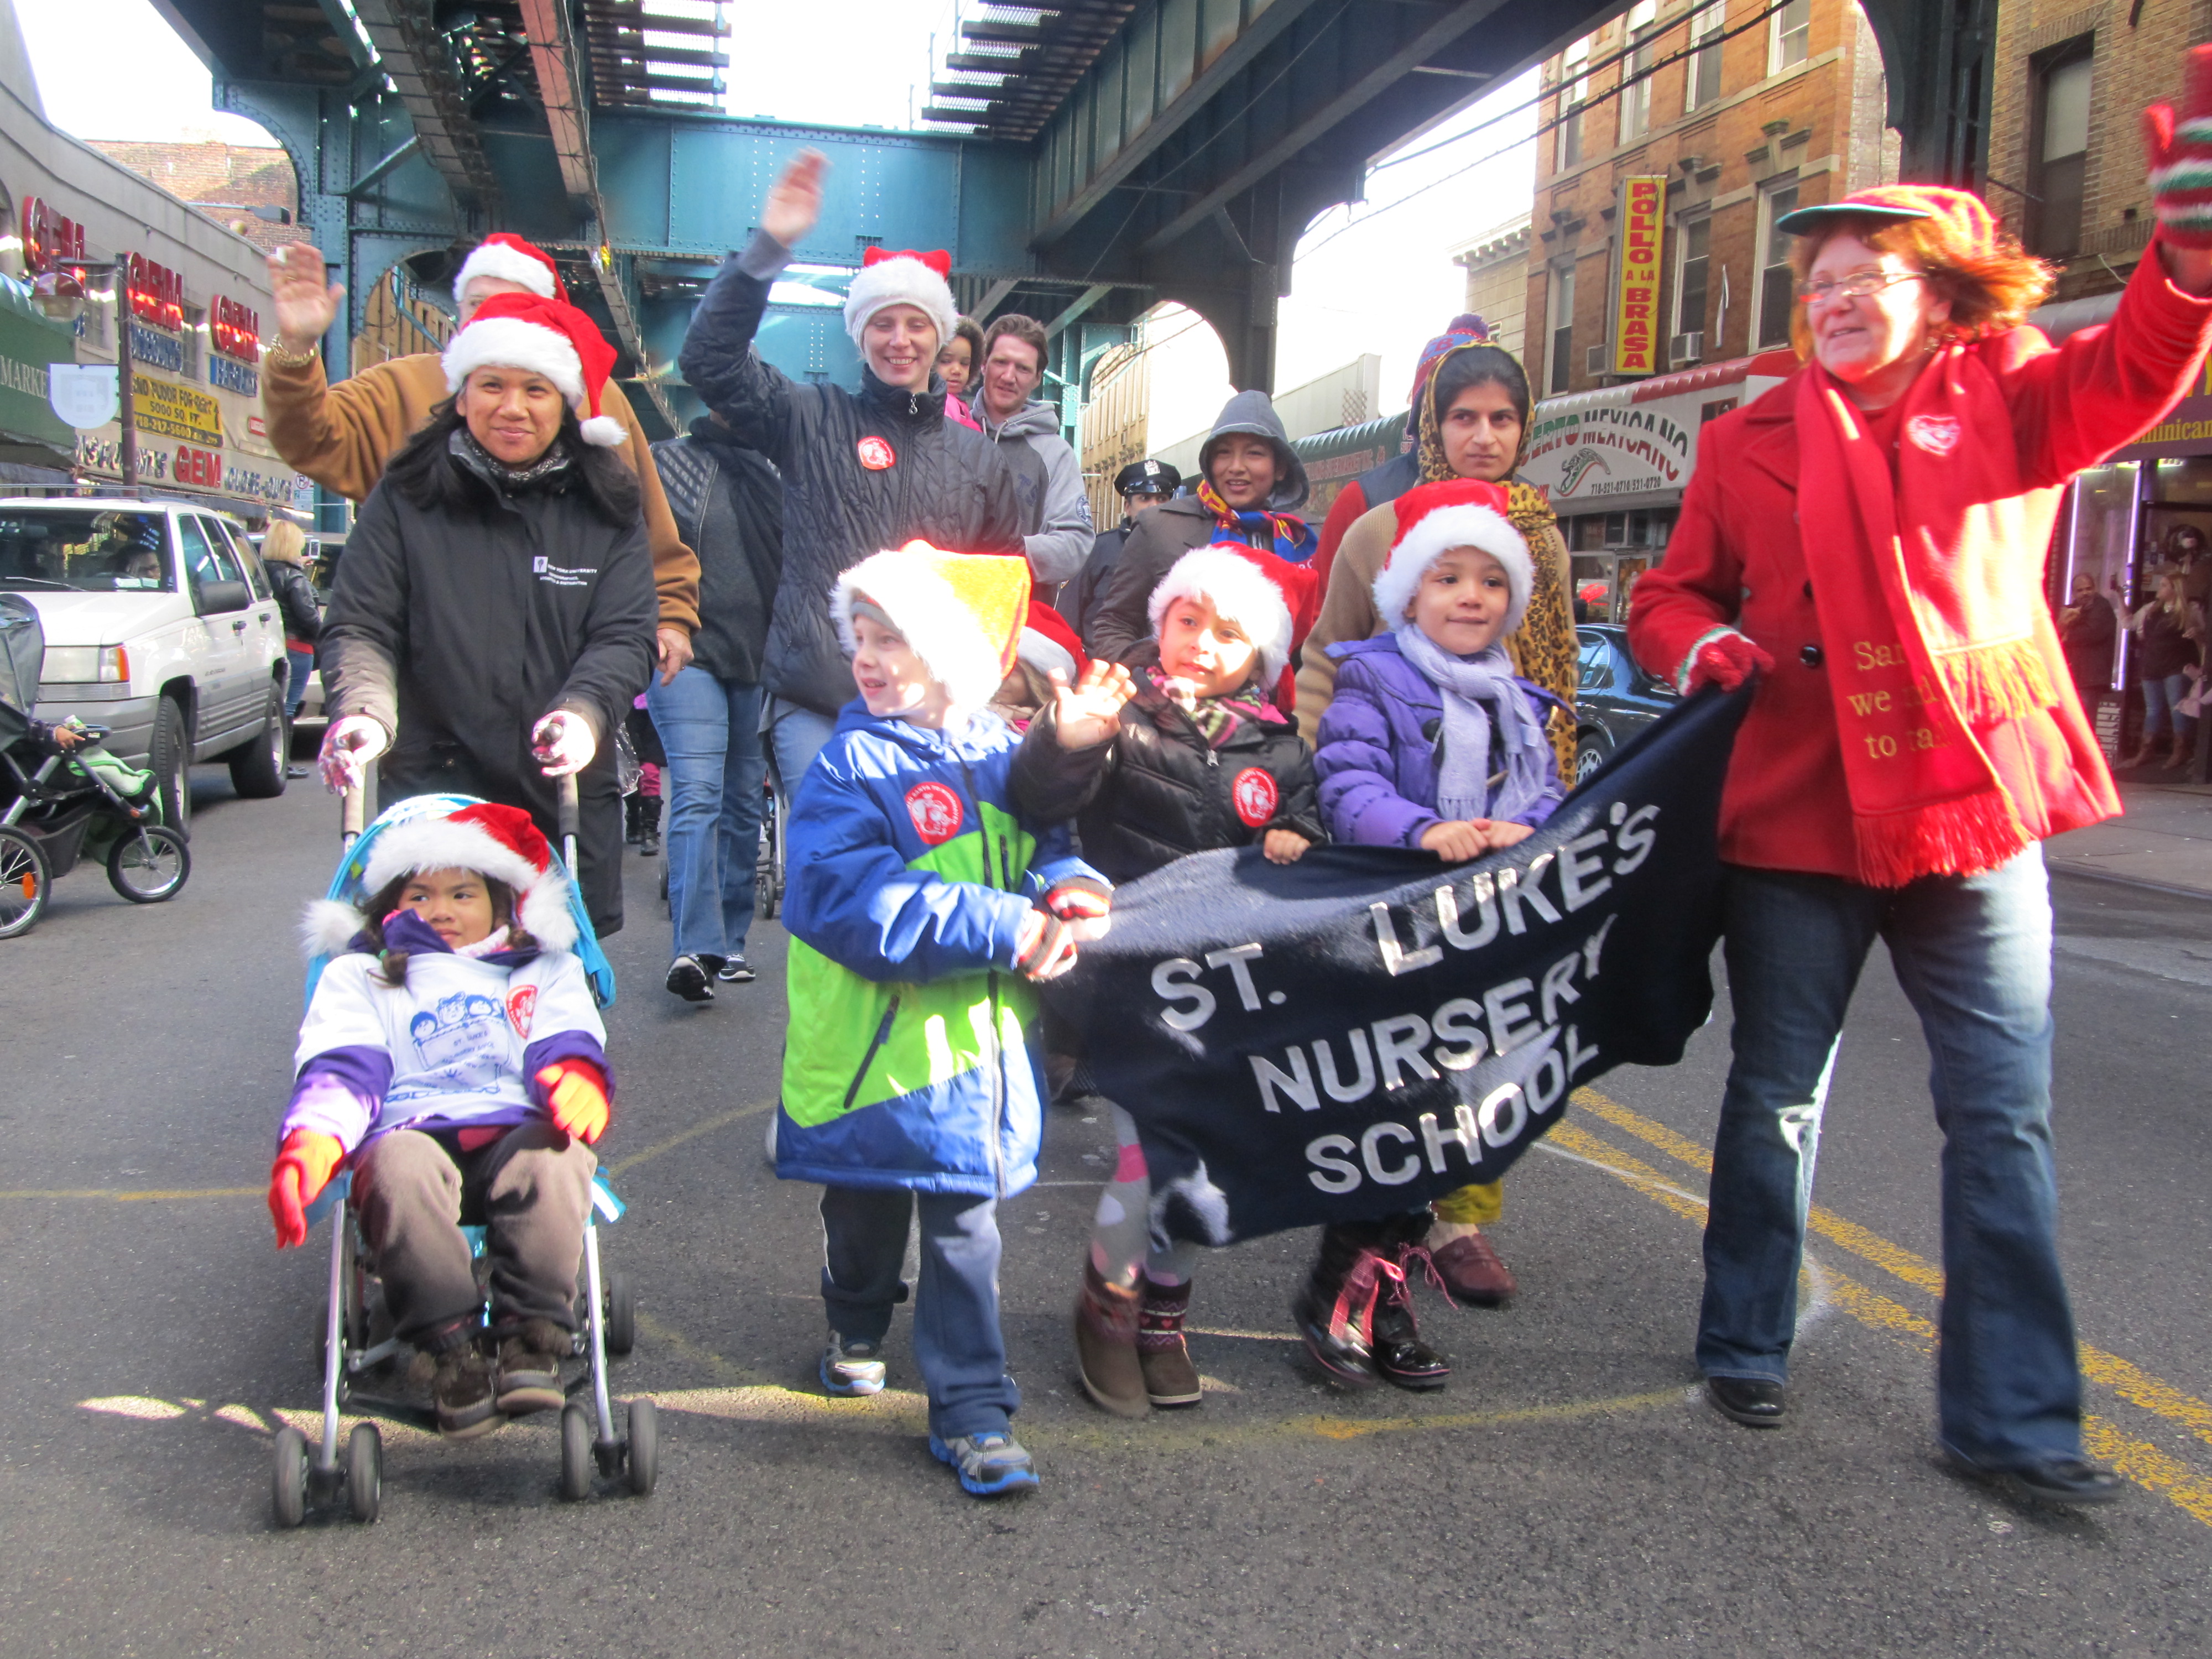 St. Luke's Nursery School got many cheers along the parade route.